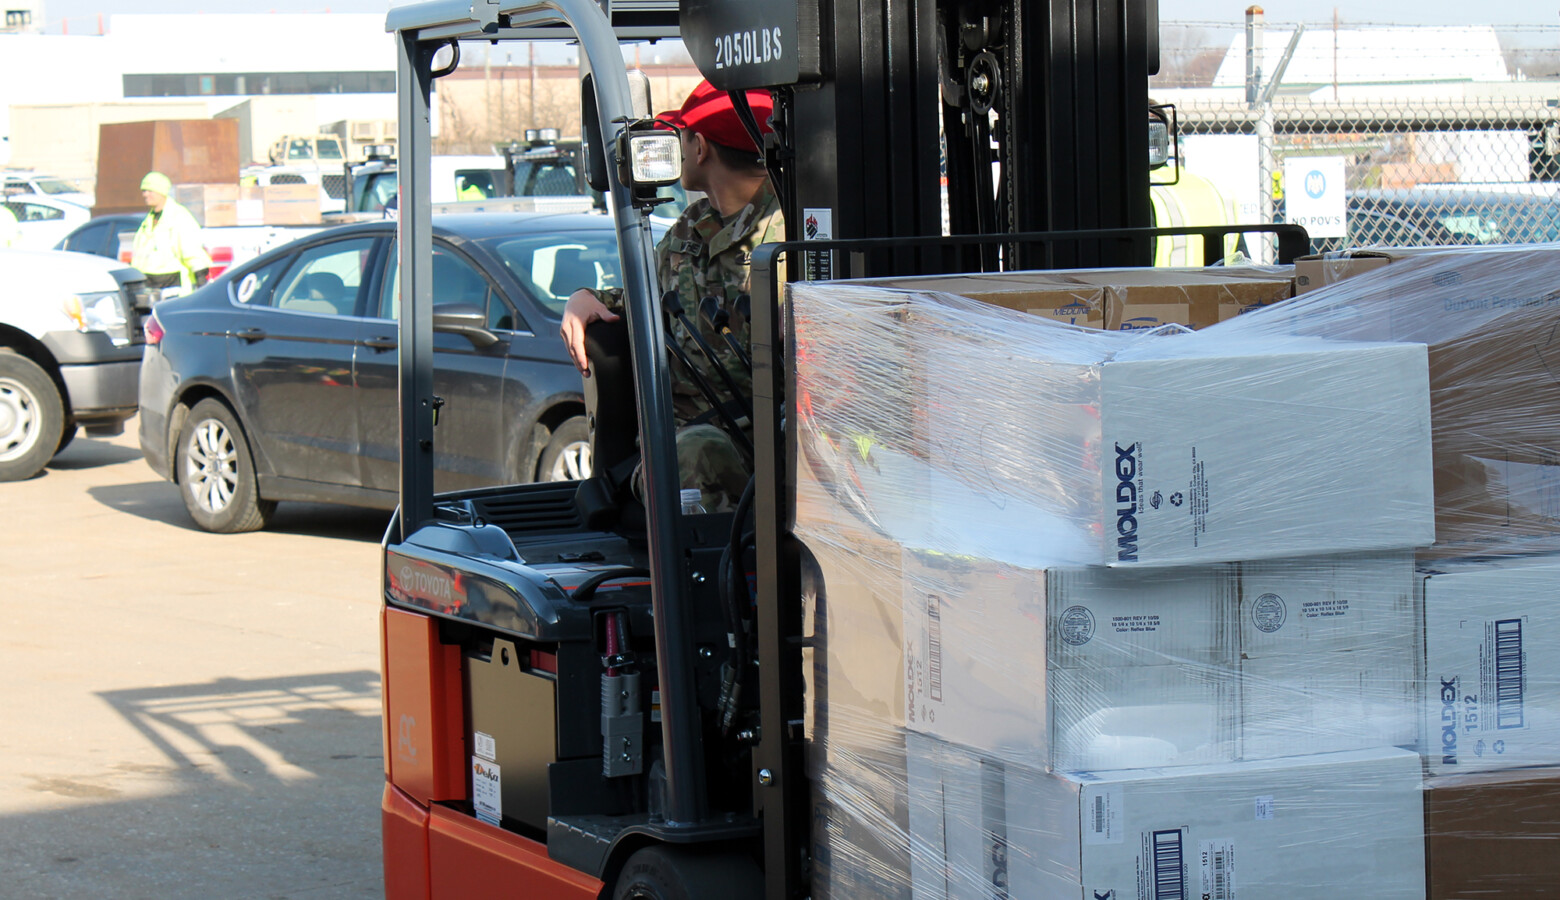 The National Guard organizes deliveries of personal protective equipment to hospitals on March 26. (Lauren Chapman/IPB News)